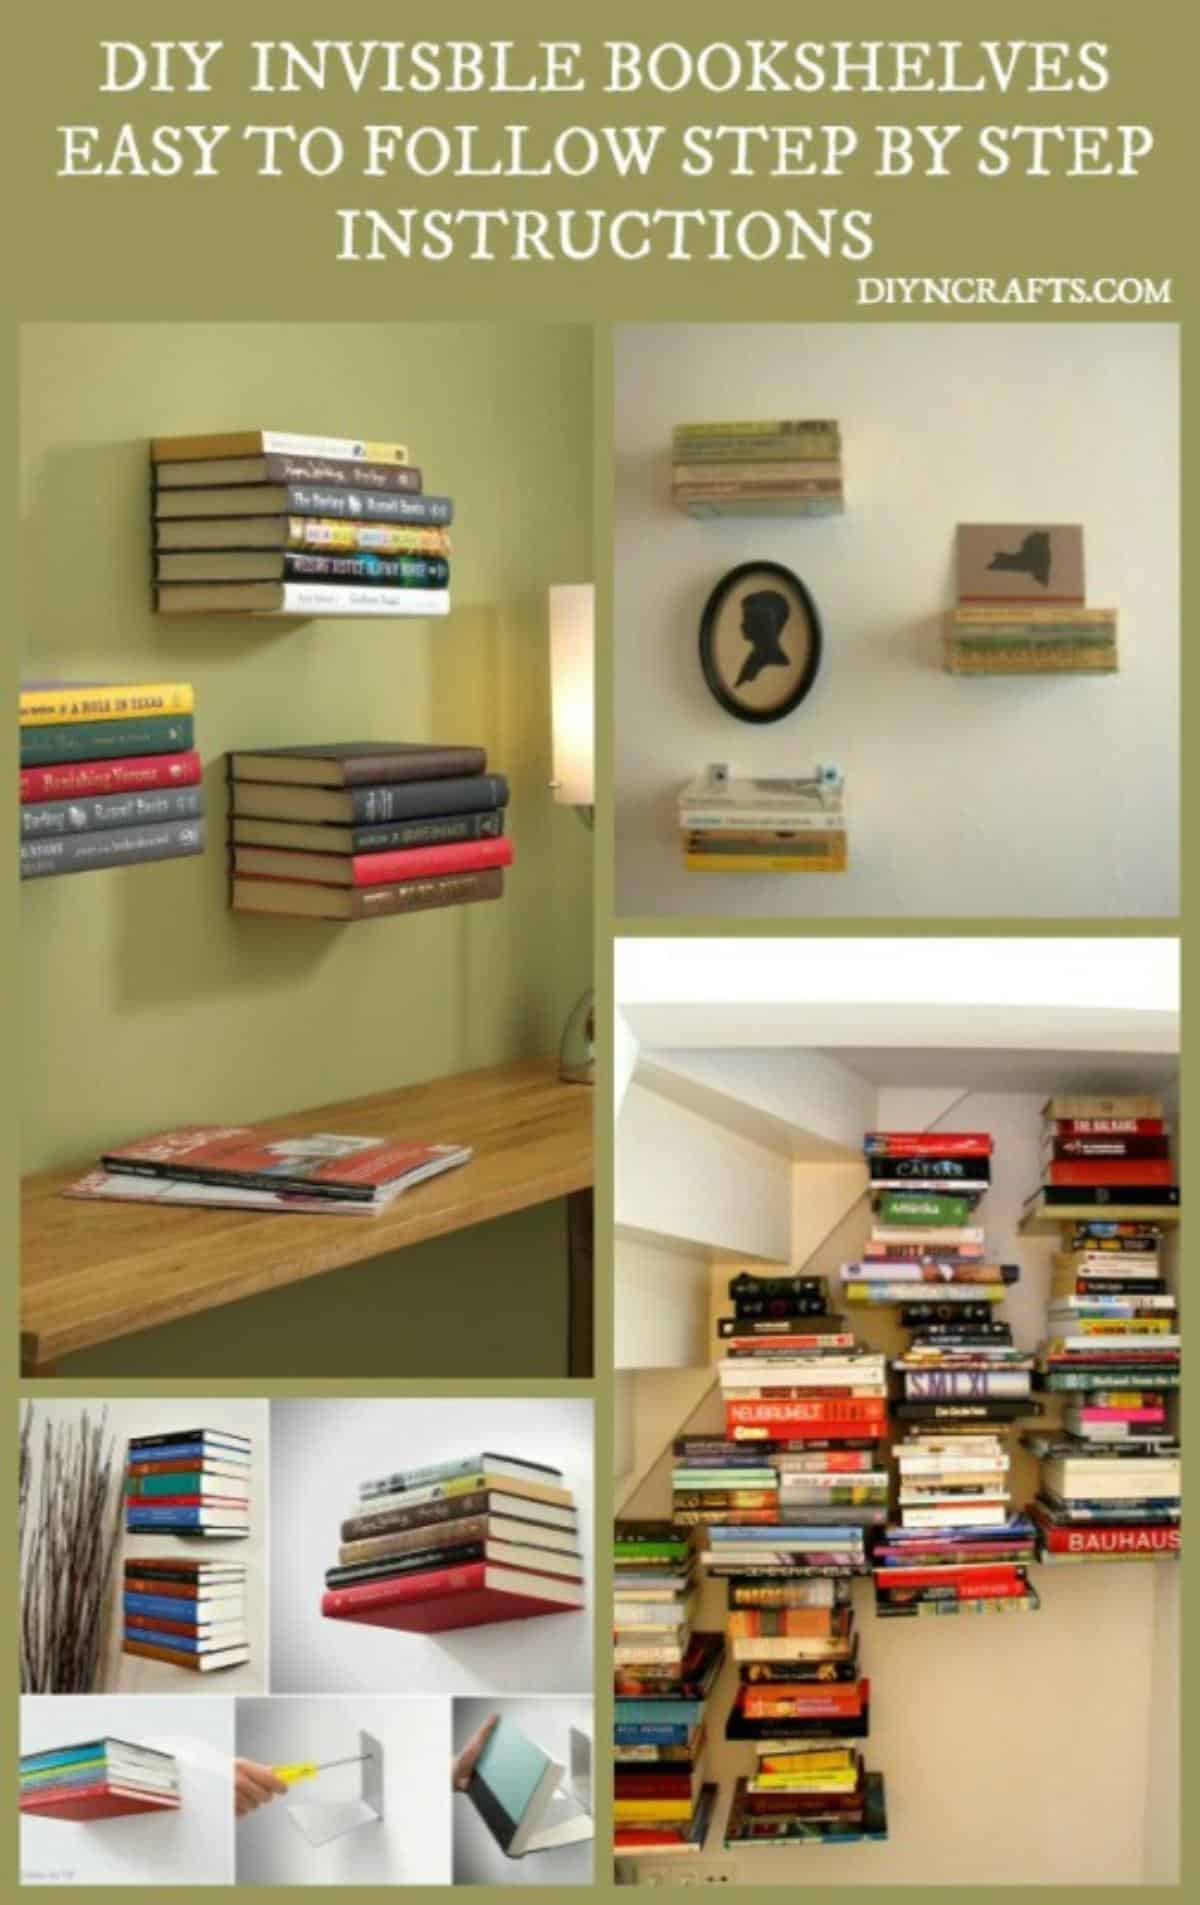 DIY Invisible Shelves collage.